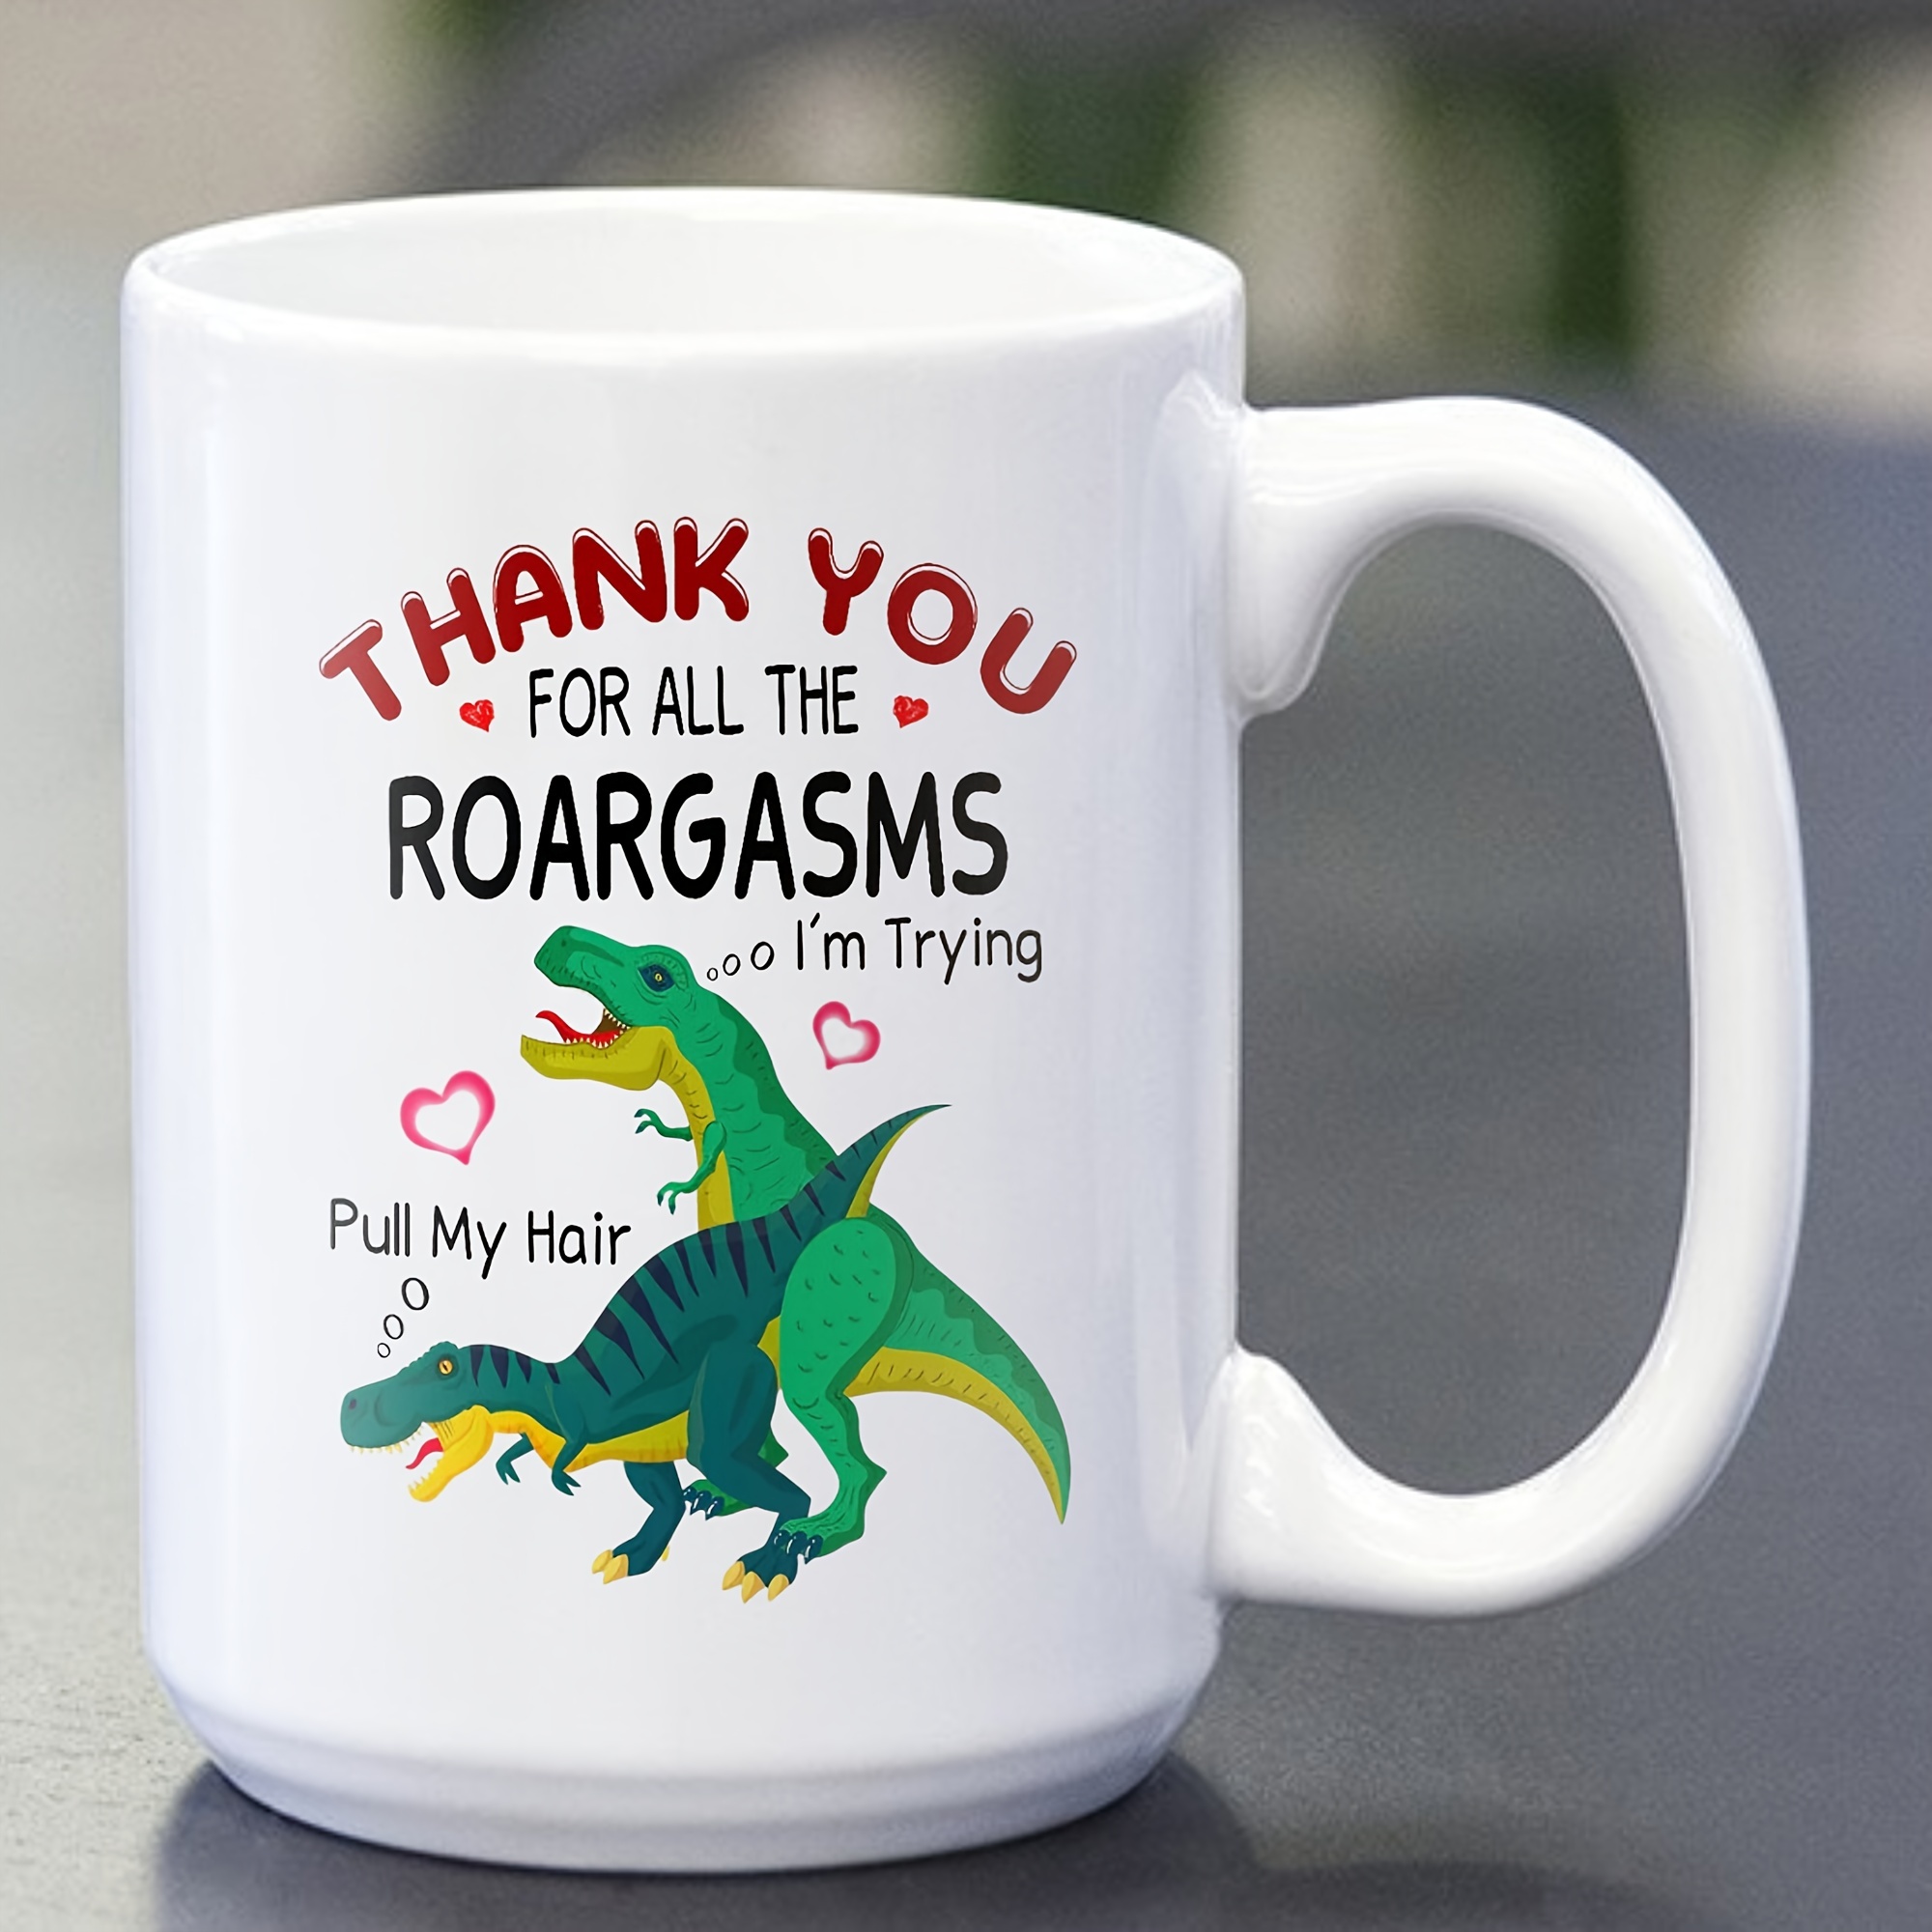 Coffee Mug, Water Cup, Don't Mess With Mamasaurus You'll Get Jurasskicked -  Funny Dinosaur Birthday Mom Gift - Presents For Mom From Husband Son  Daughter, Summer Drinkware, Kitchen Stuff, Home Kitchen Items